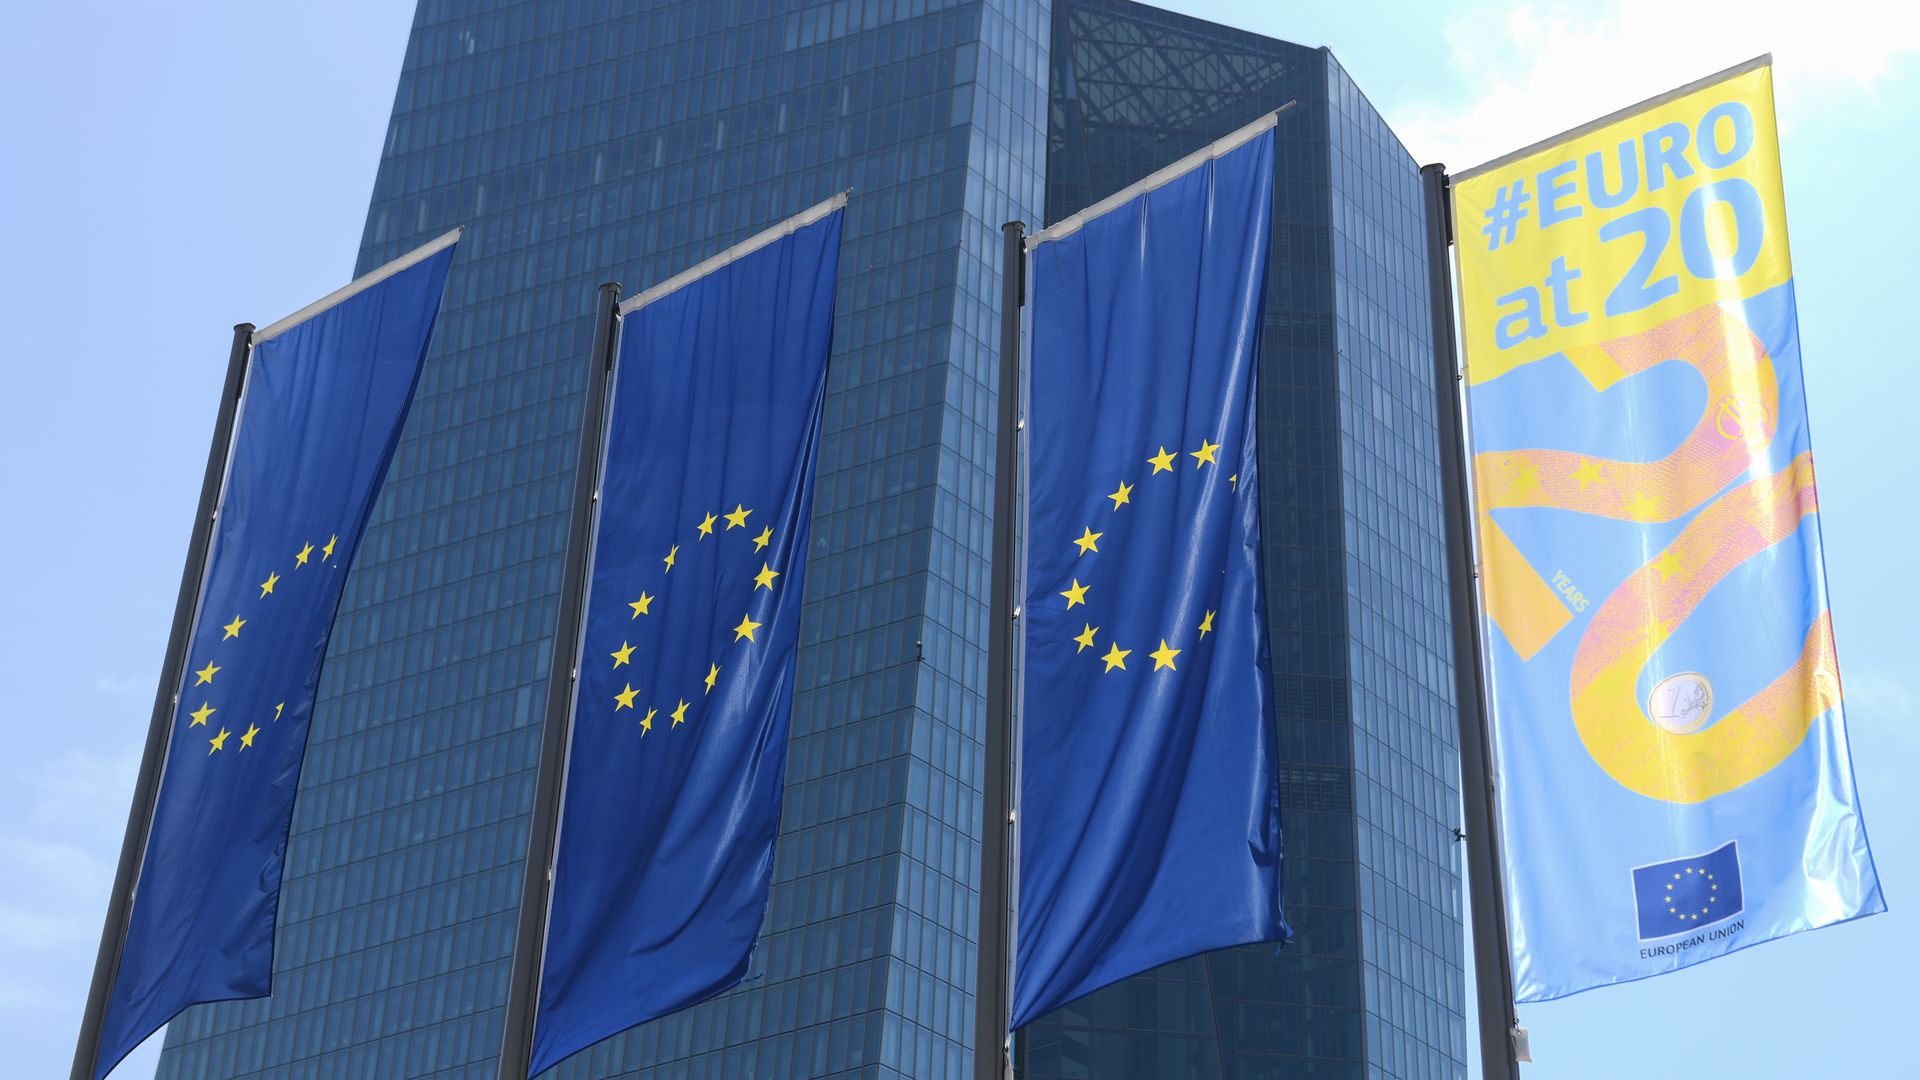 In this image, three EU flags hang from poles outside a skyscraper.